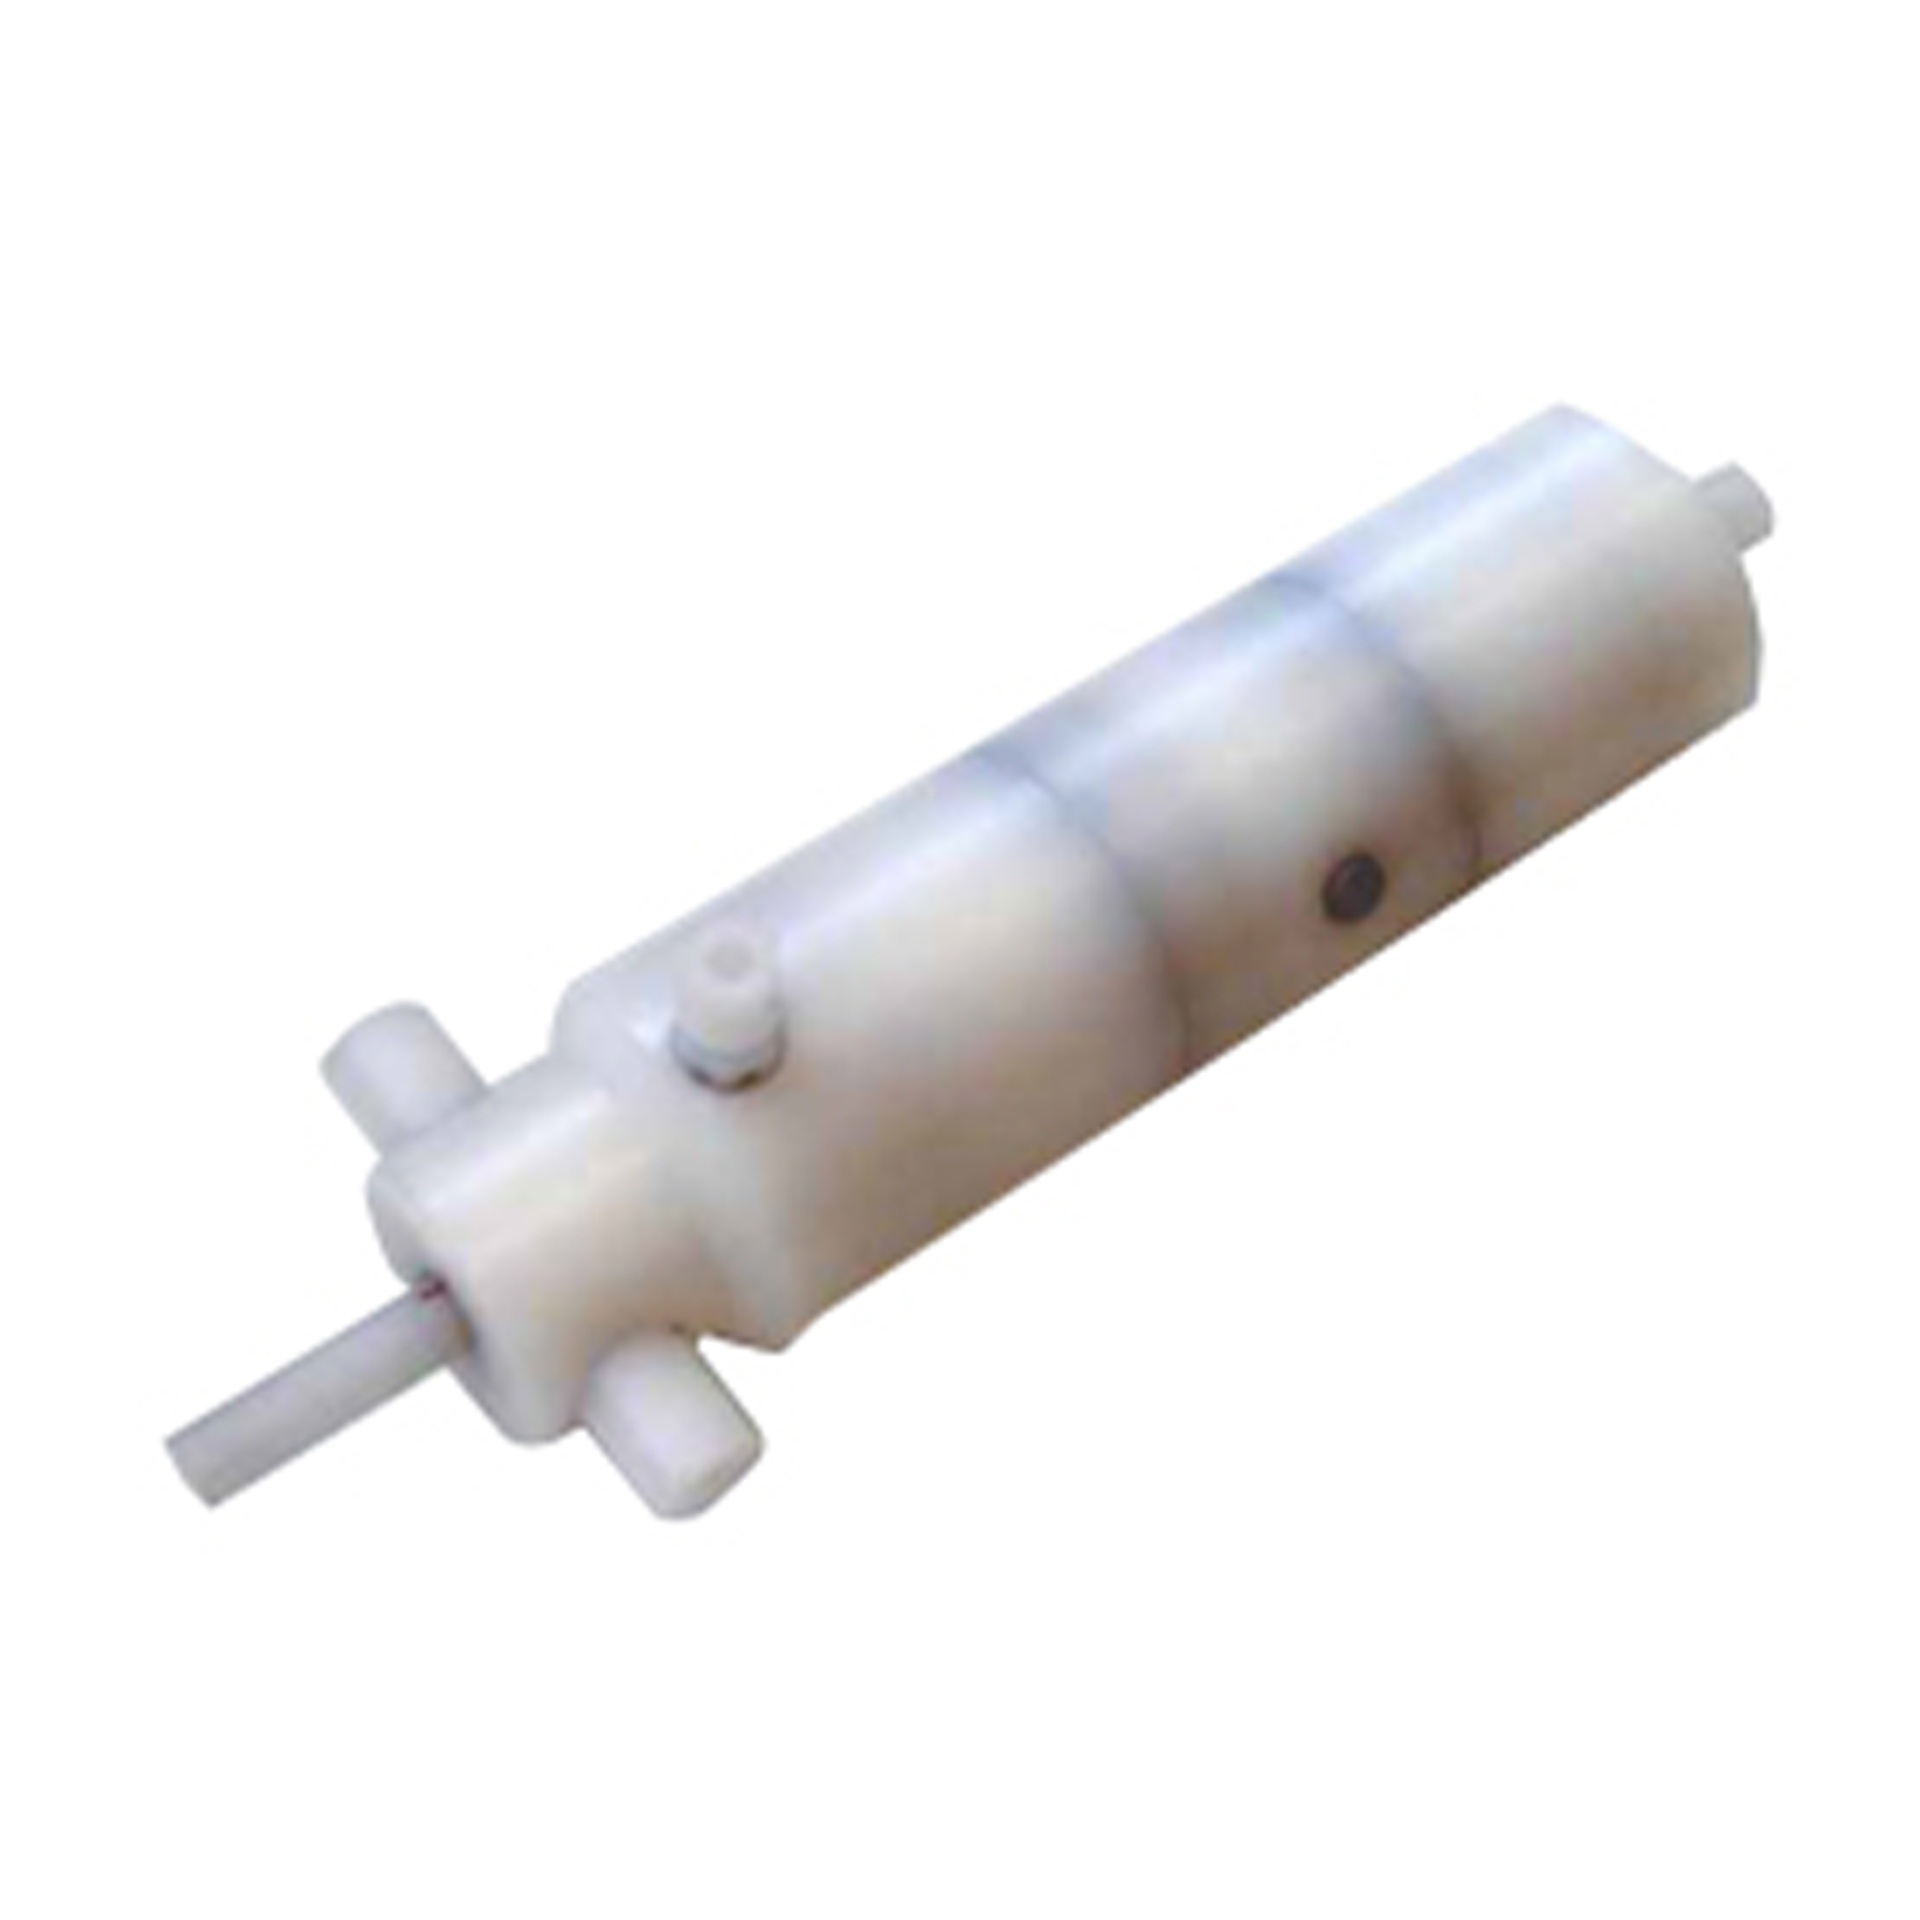 All-plastic feed cylinders for PCB etching systems